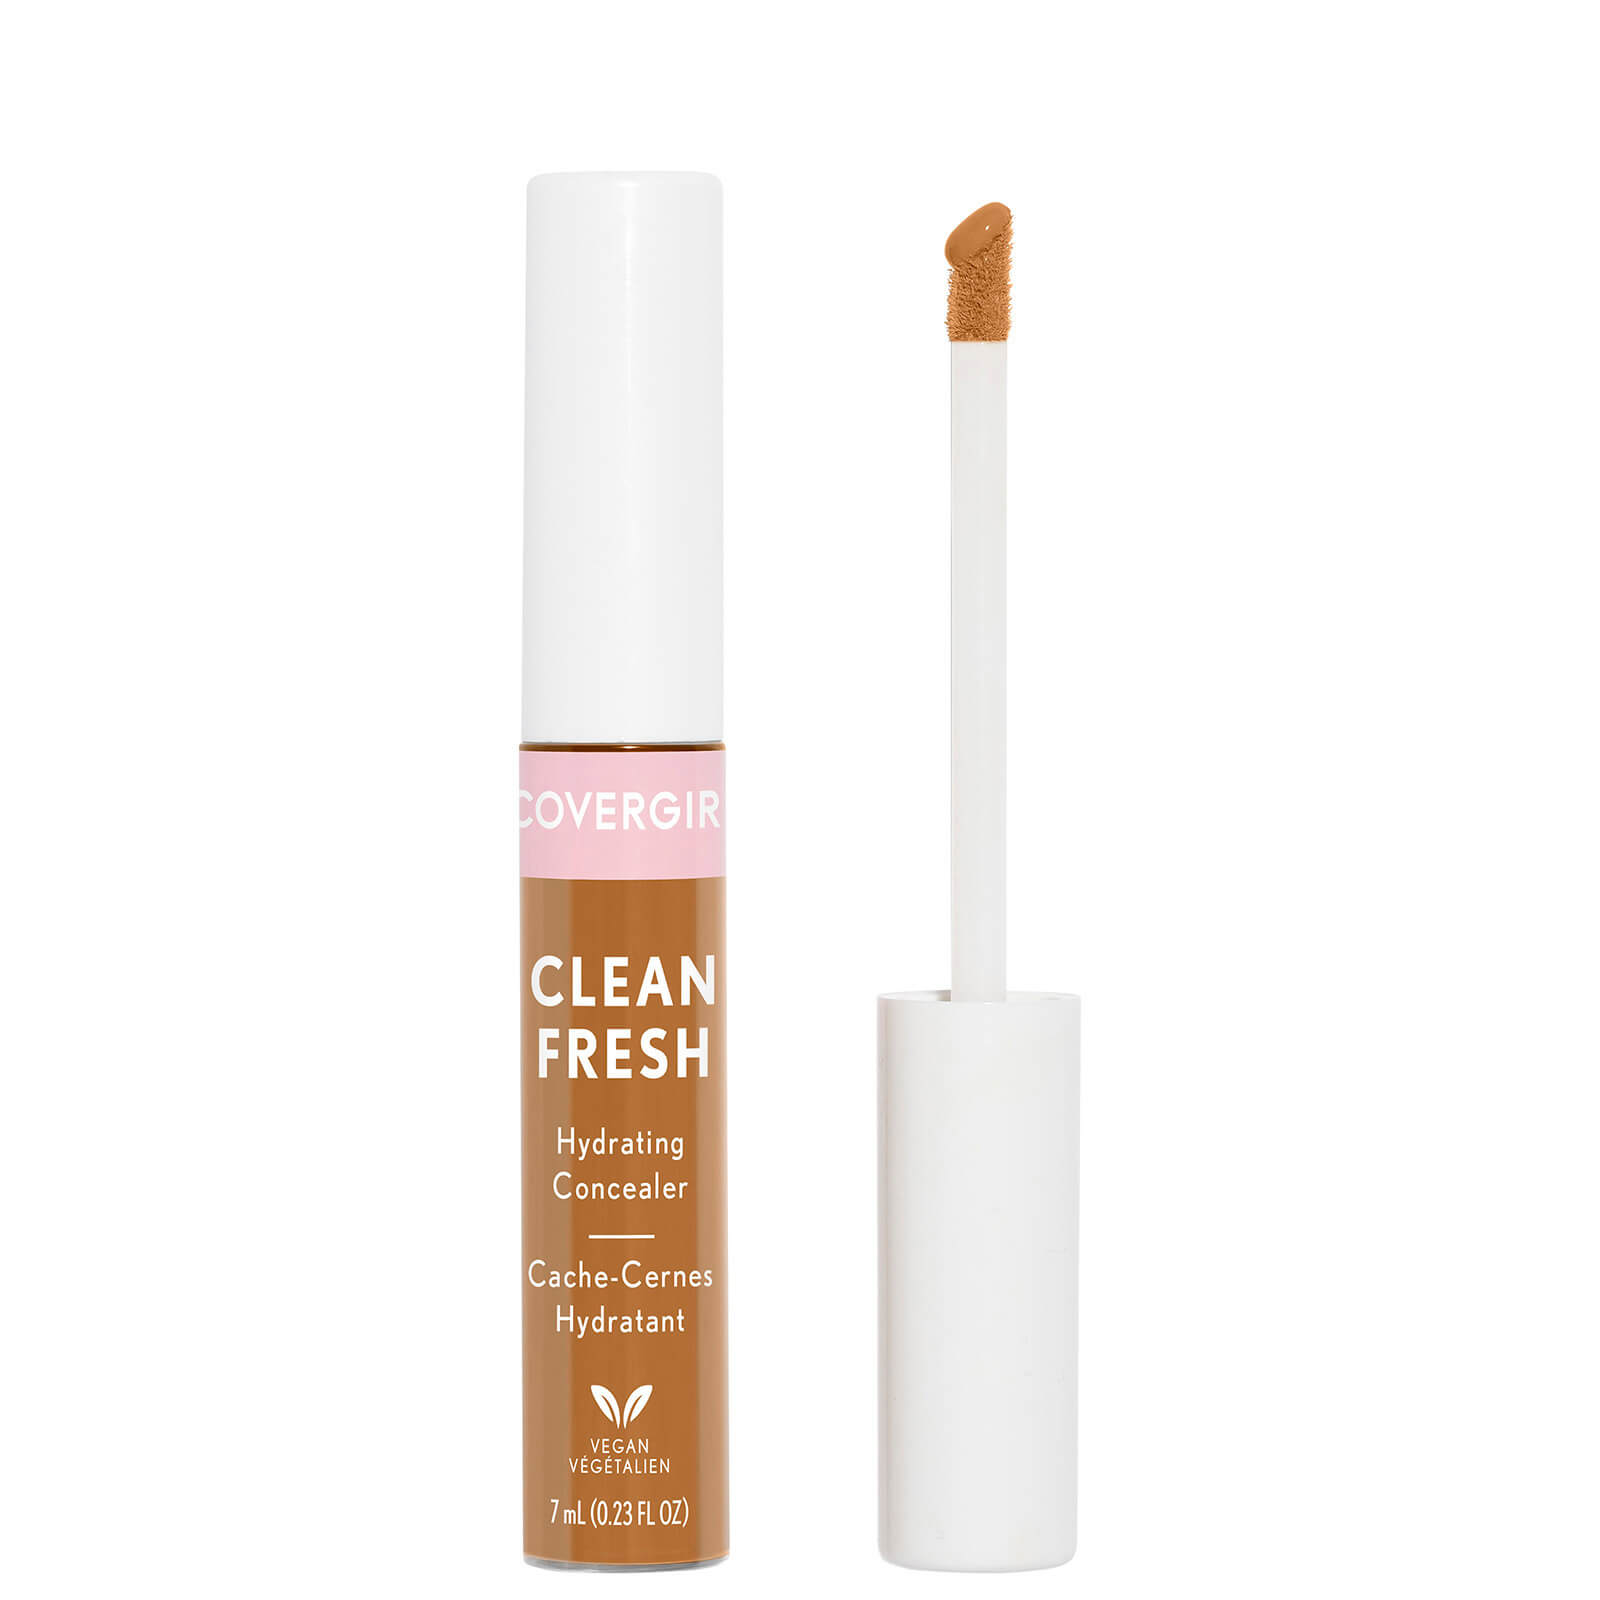 Covergirl Clean Fresh Hydrating Concealer 0.23 oz (Various Shades) - Rich Deep